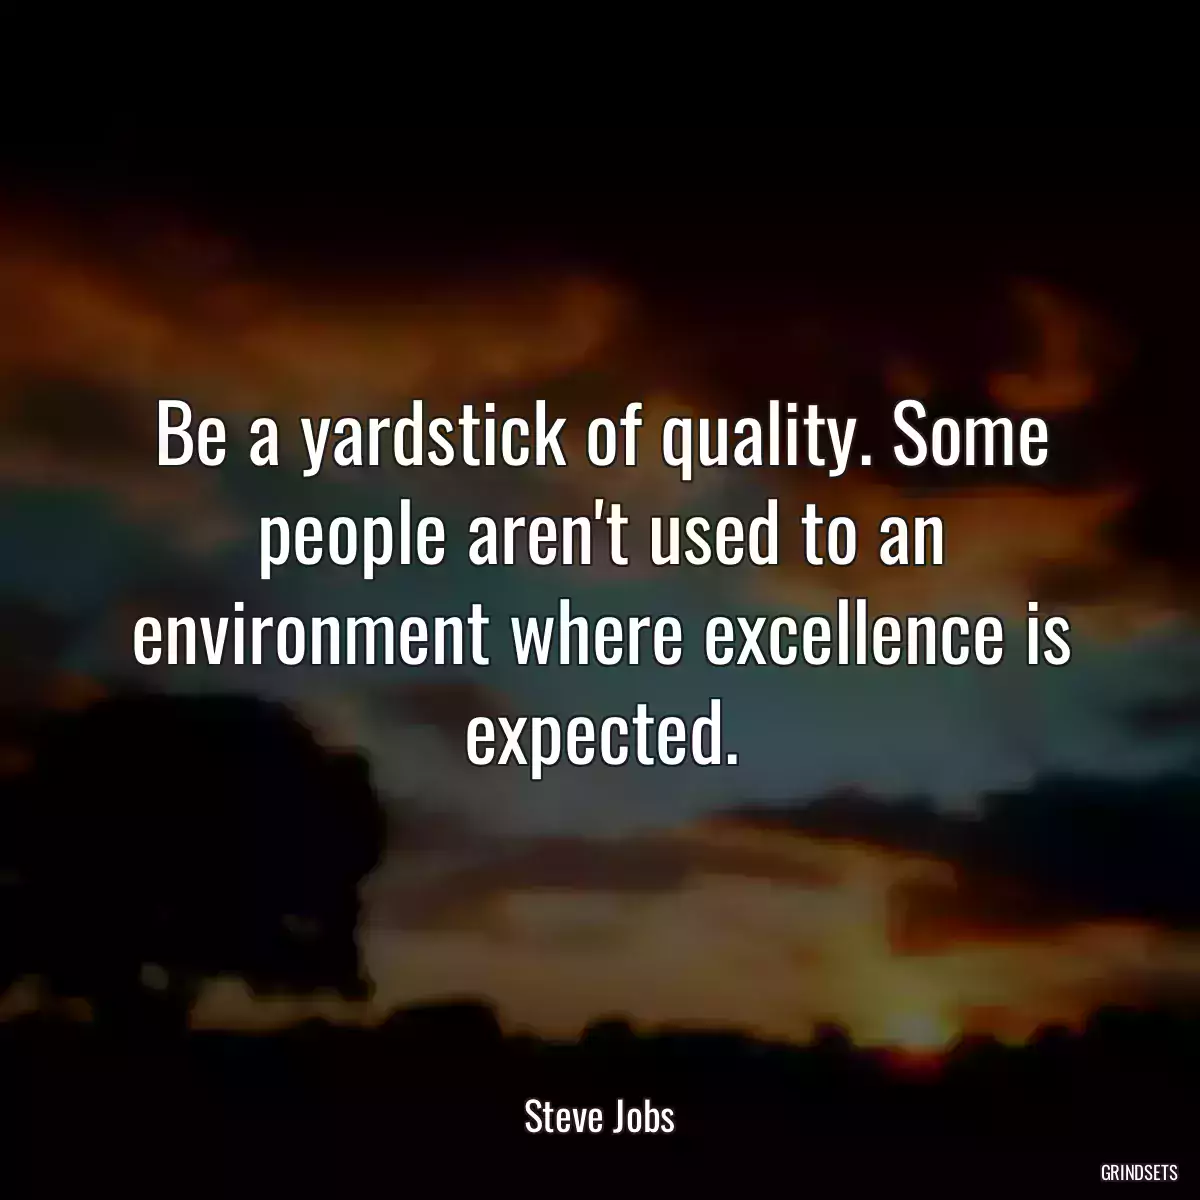 Be a yardstick of quality. Some people aren\'t used to an environment where excellence is expected.